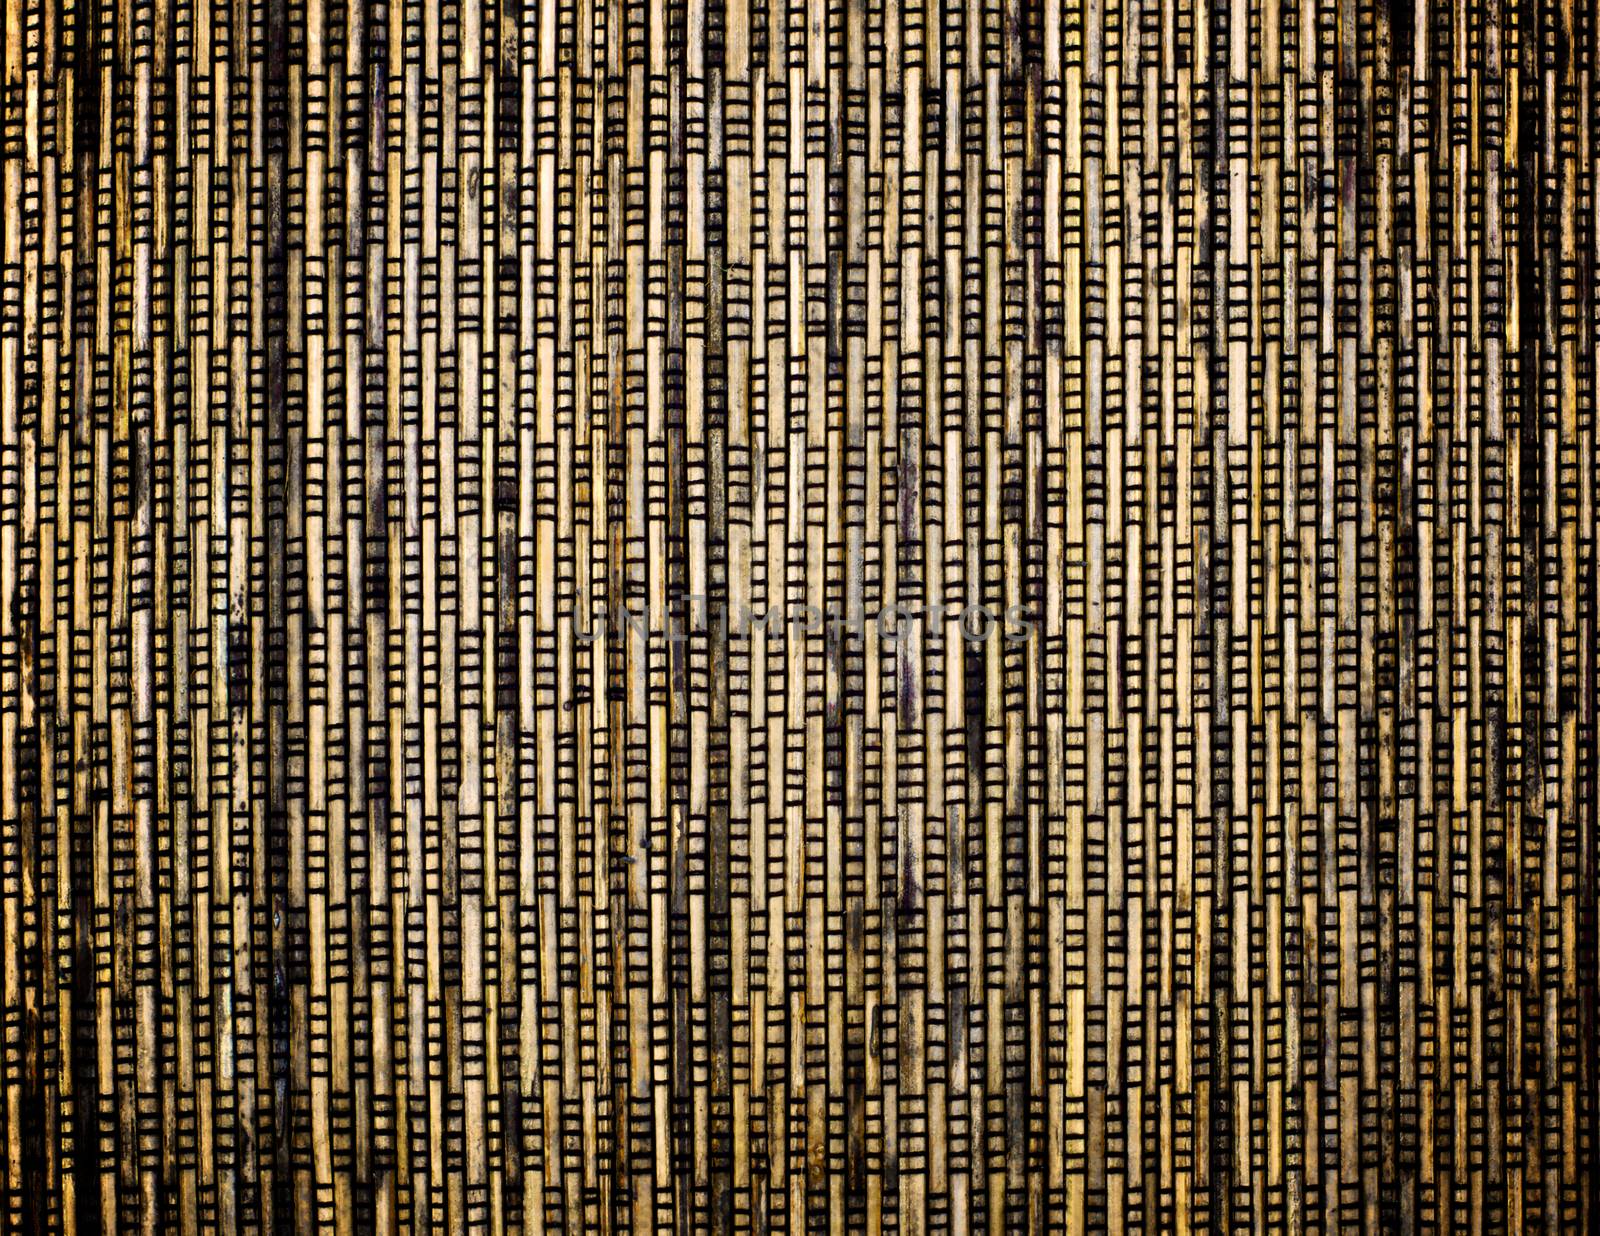 Background of Brown, Yellow and Beige Wicker Straw Mat closeup